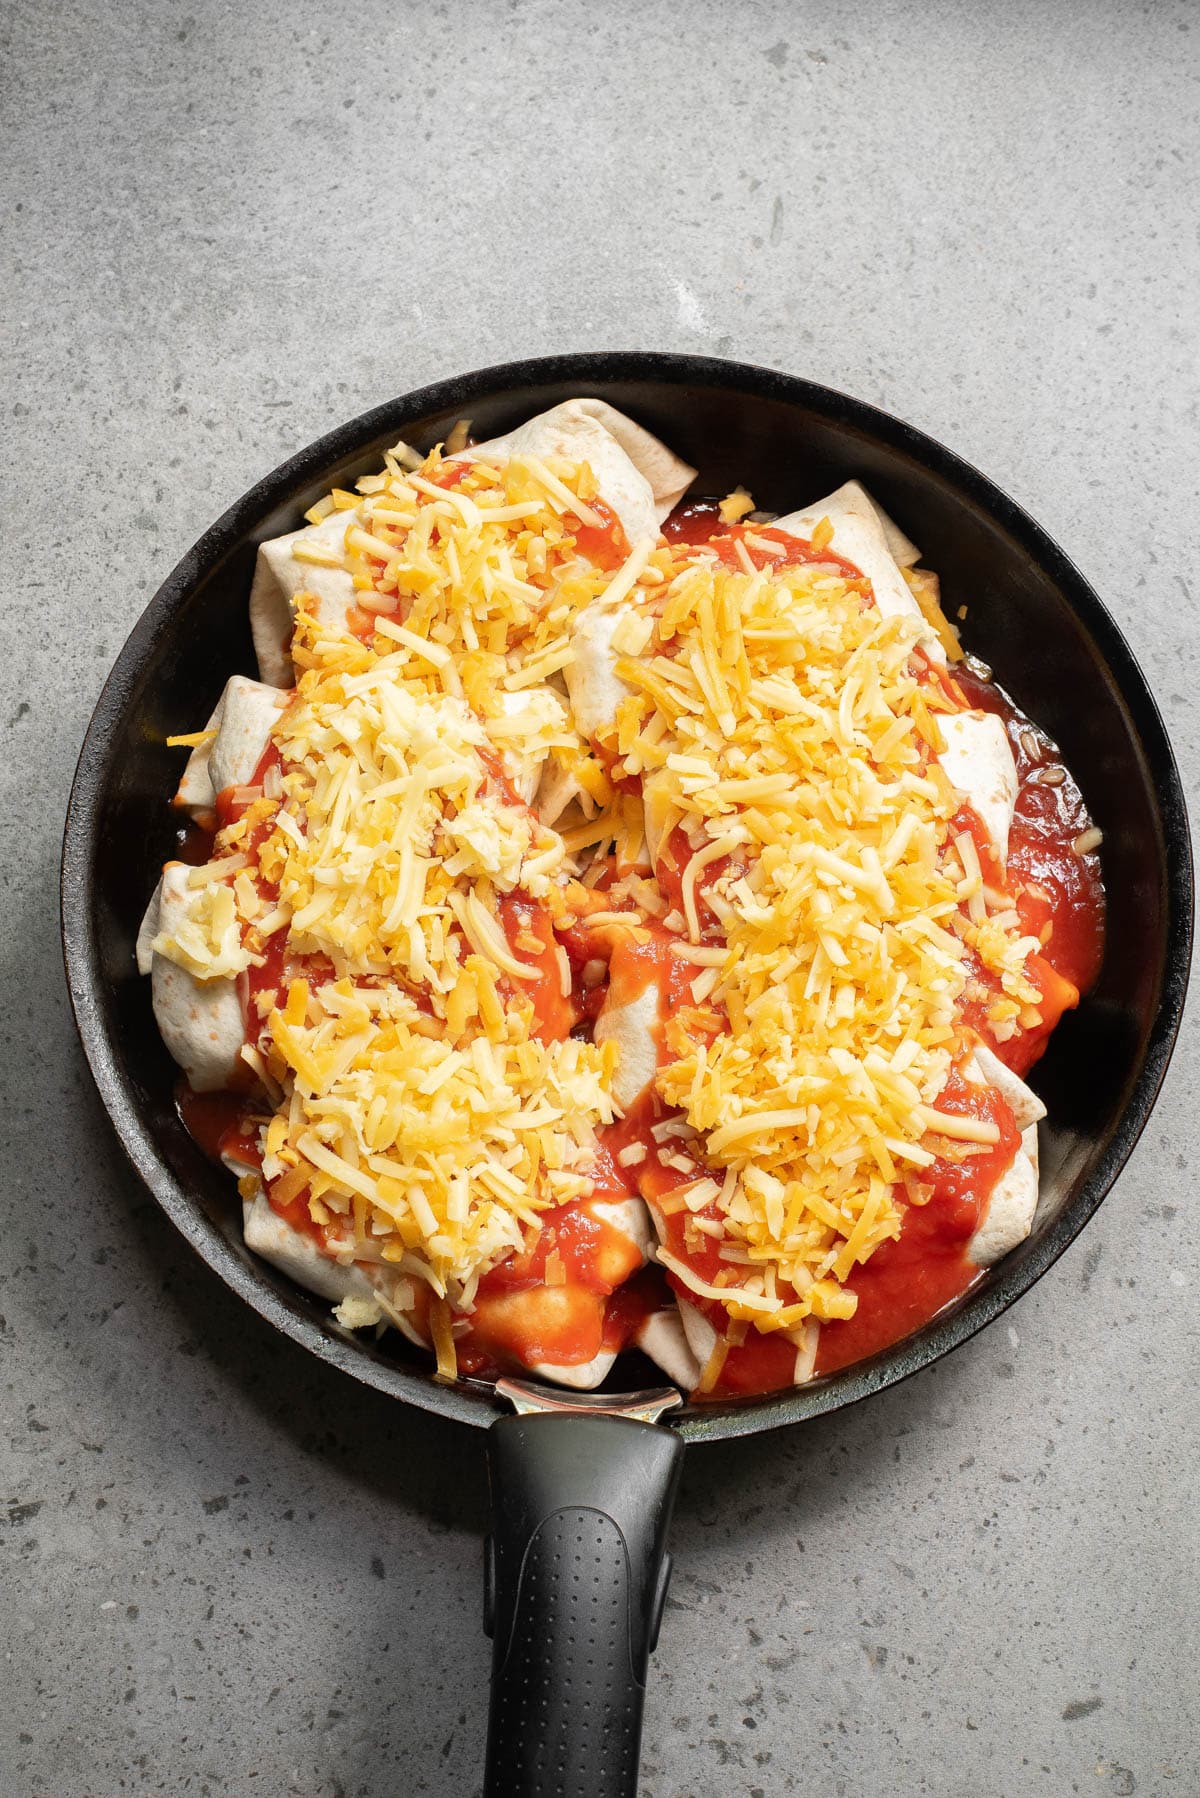 Fold tortillas and top with sauce and cheese in cast iron skillet.